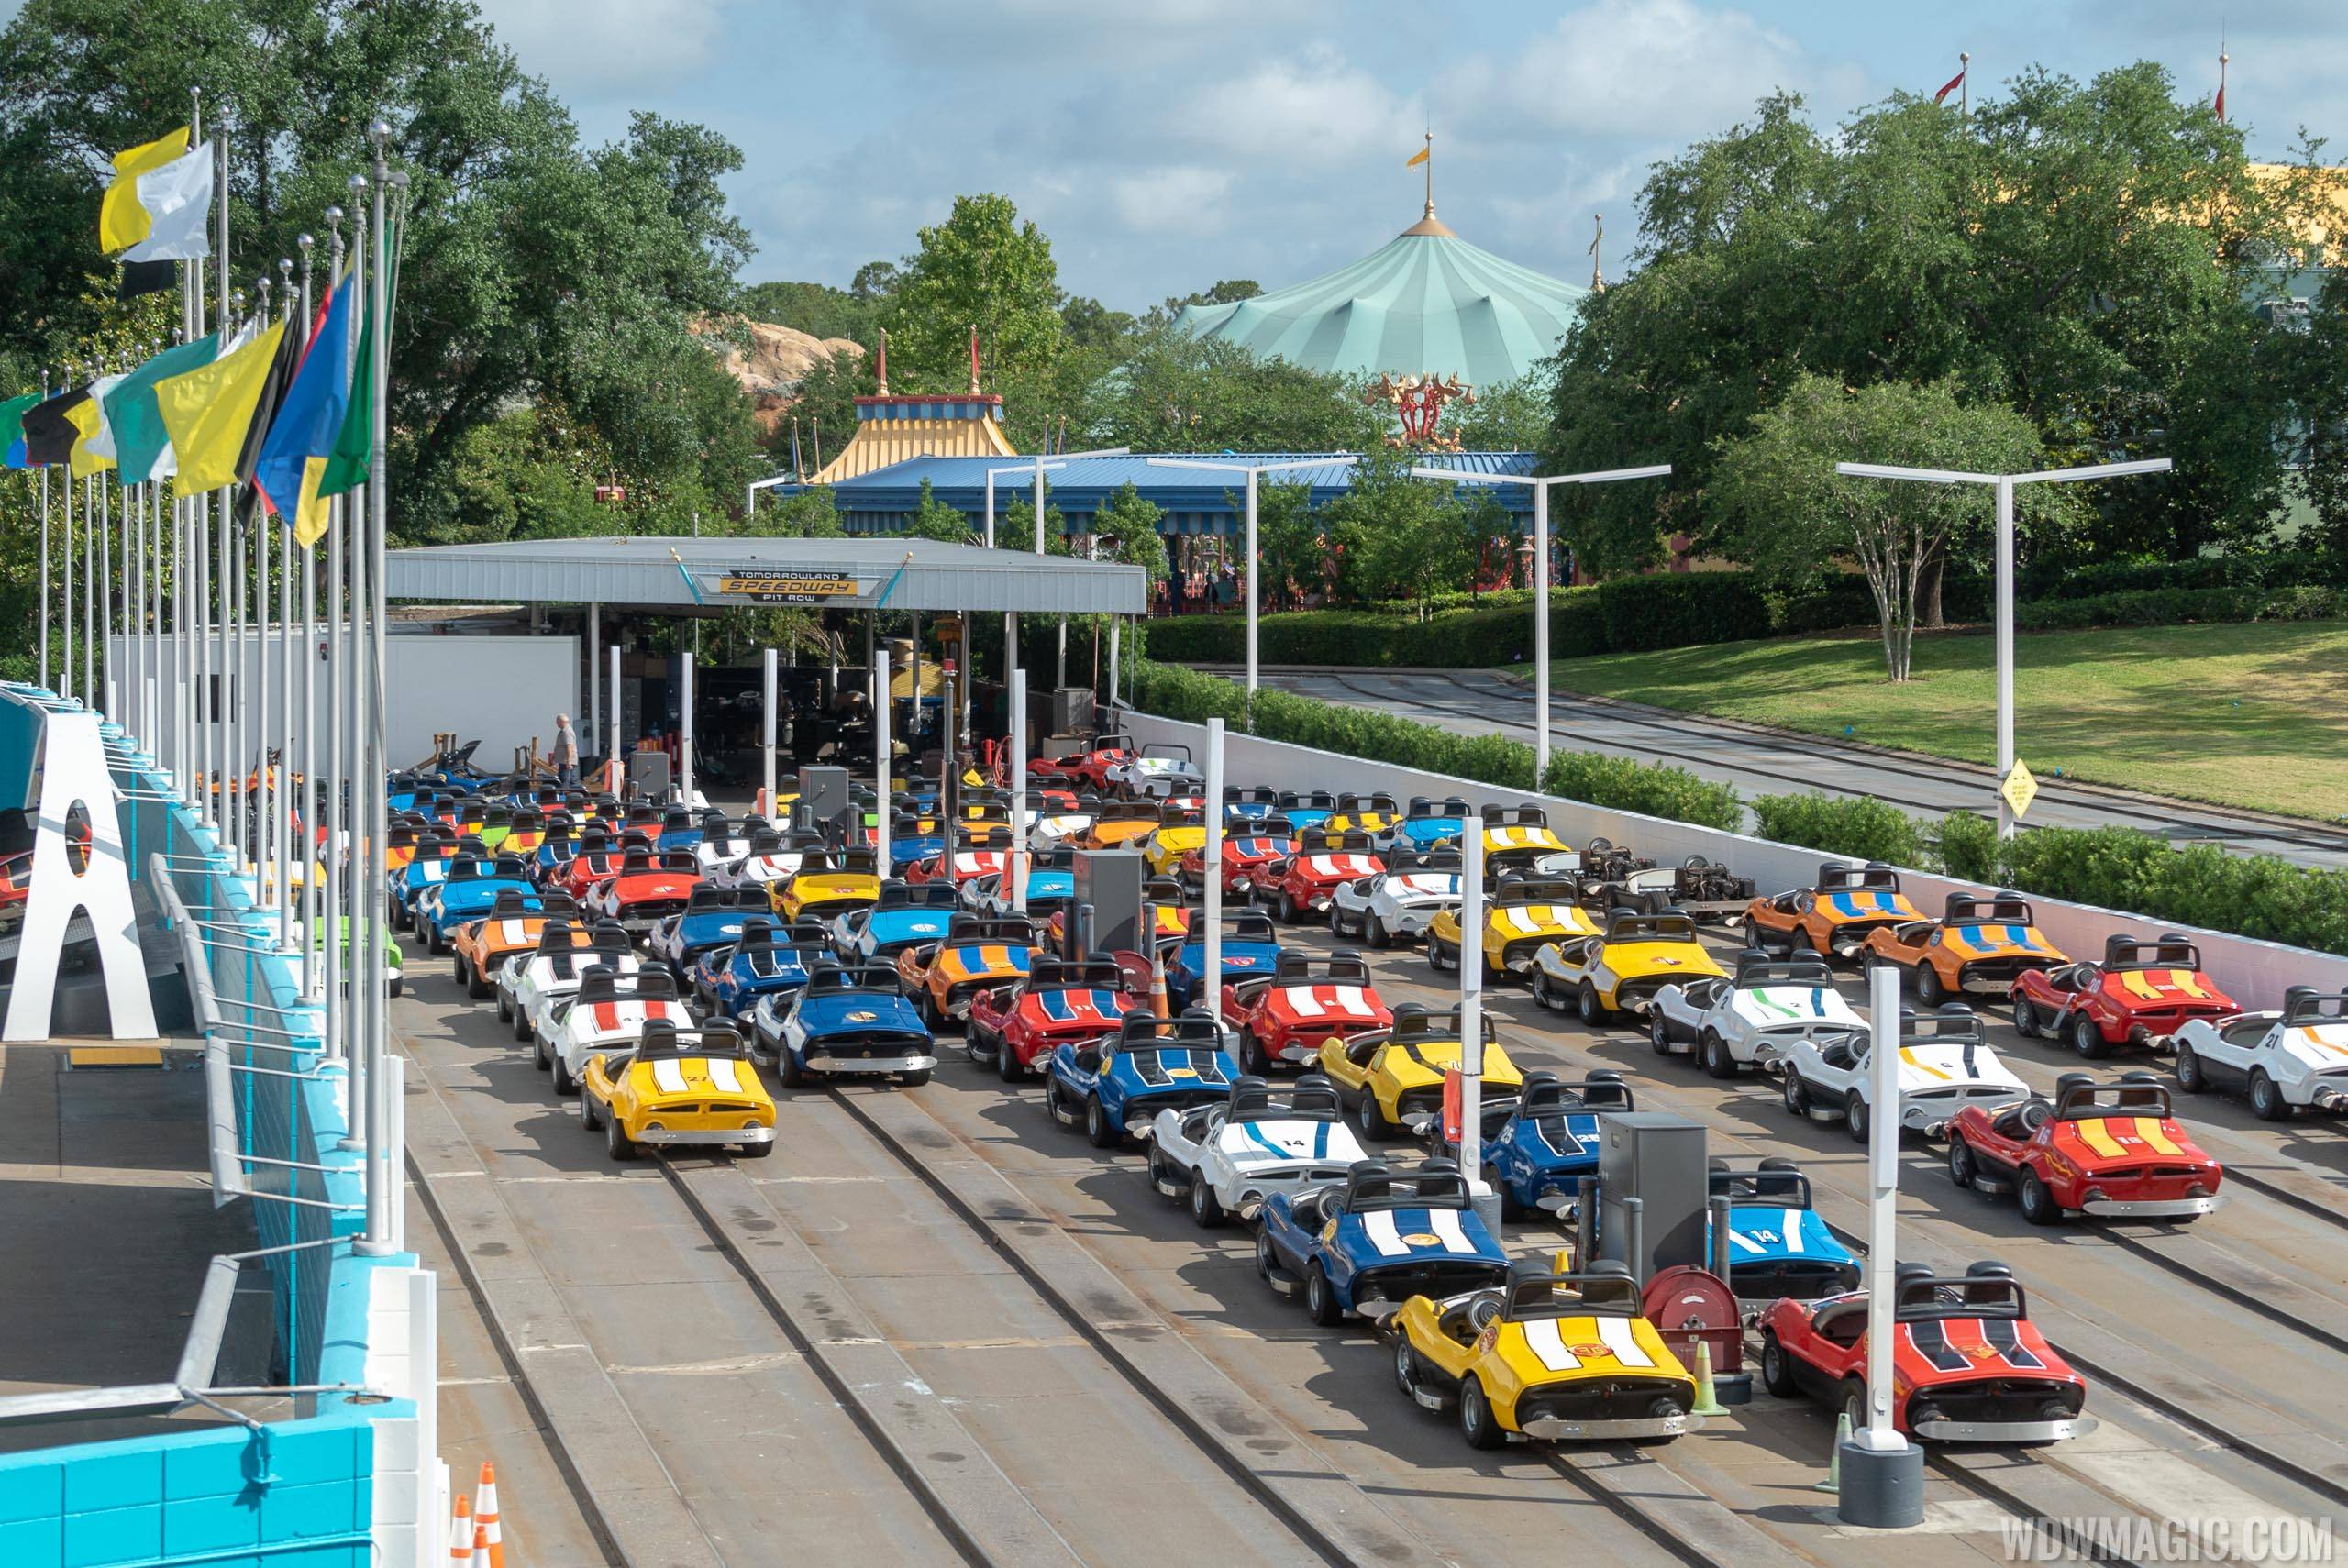 Tomorrowland Speedway closing for 5 months to re-route track around Tron